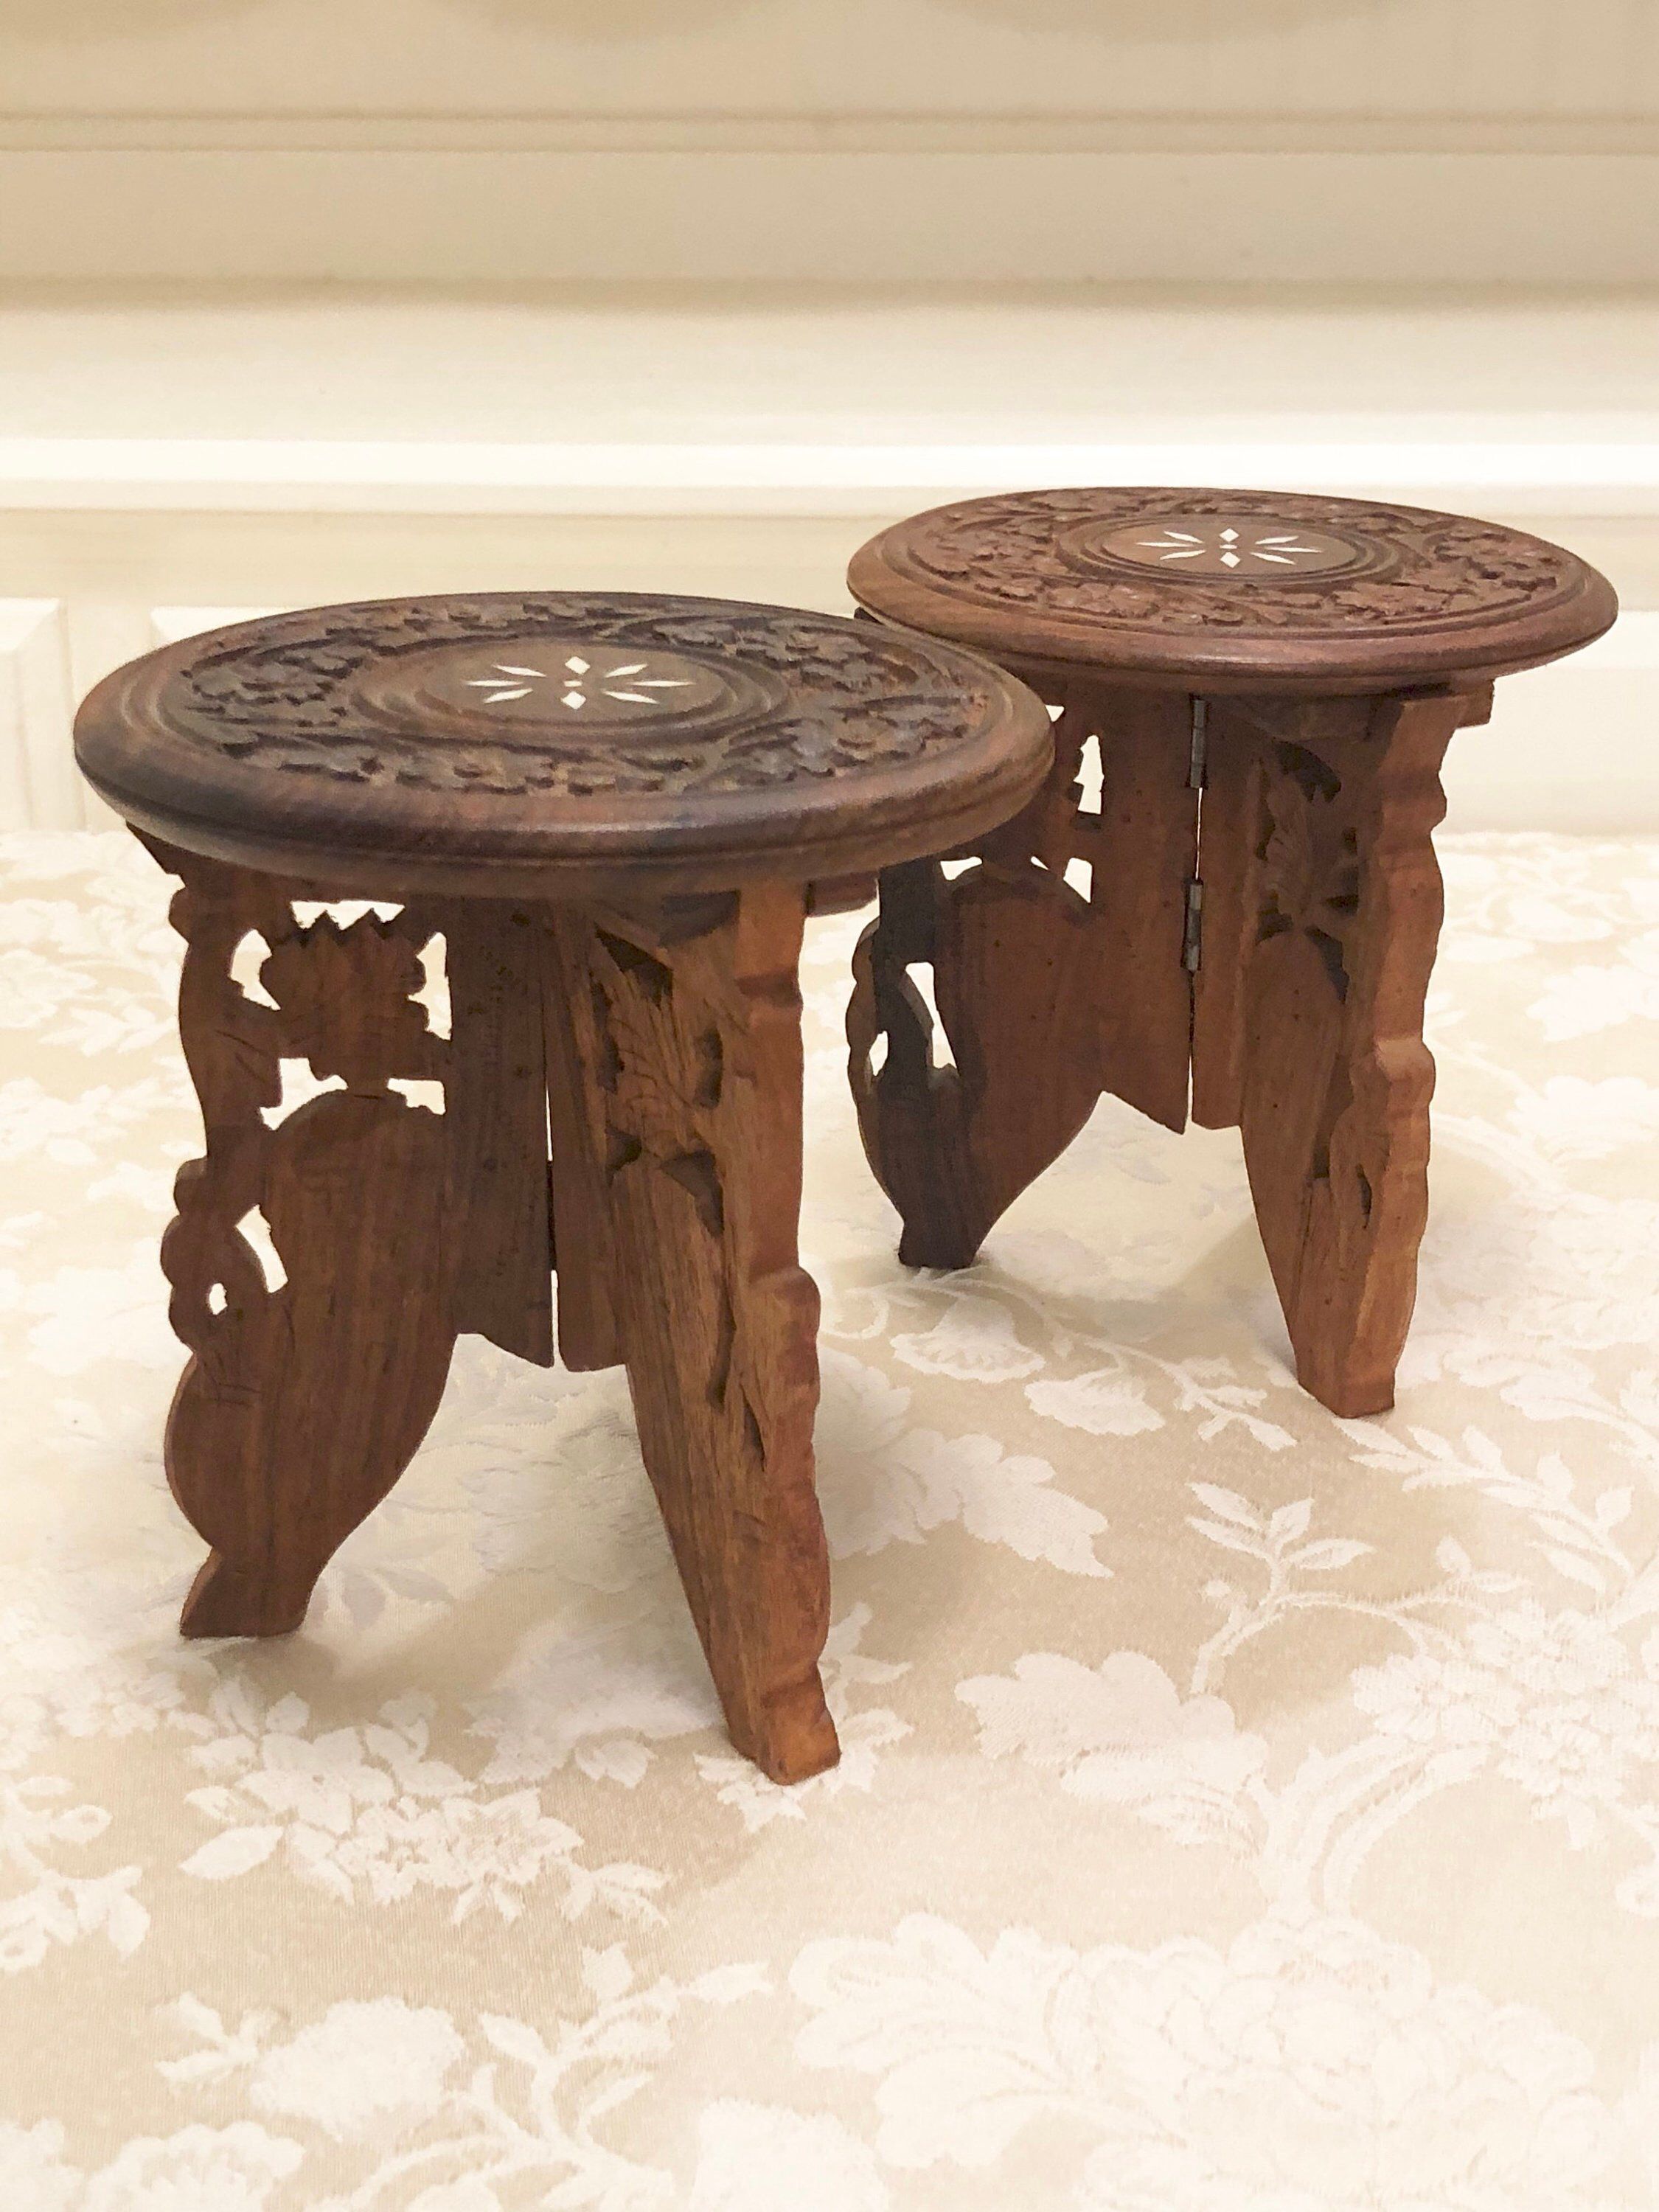 elegant carved wooden display candle holder small accent table shelf excited share this item from etsy yoga decor pottery barn patio furniture tall chairs reproduction designer